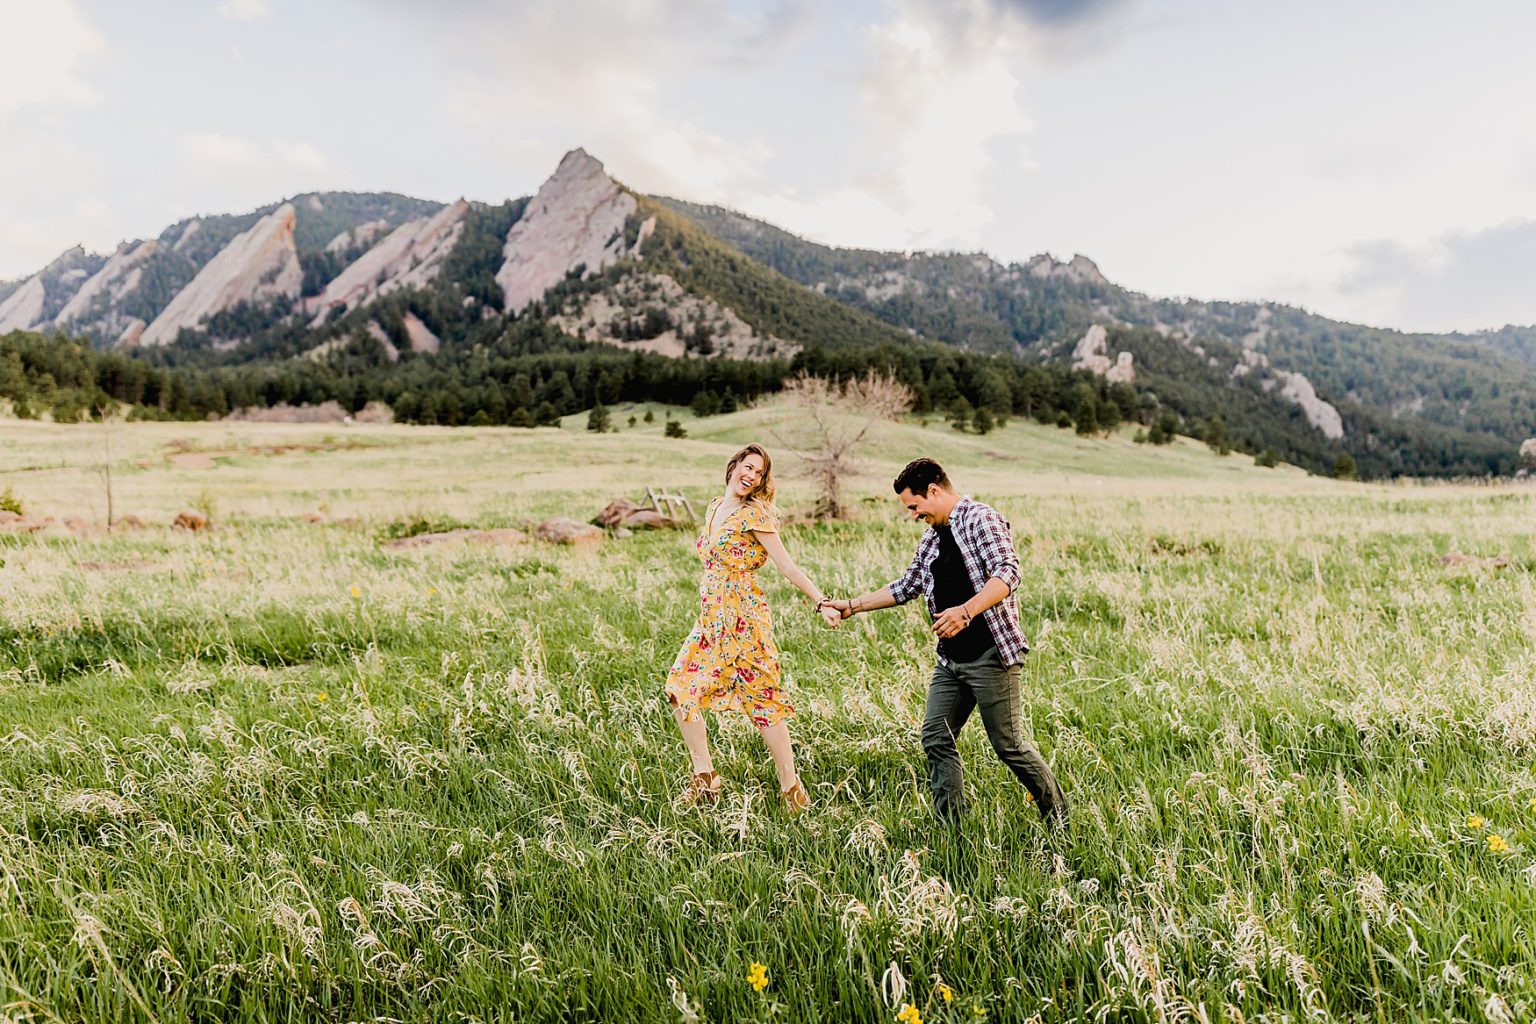 adventurous couple running together at chautauqua park in boulder colorado for their mountain engagement photos including beautiful green scenery